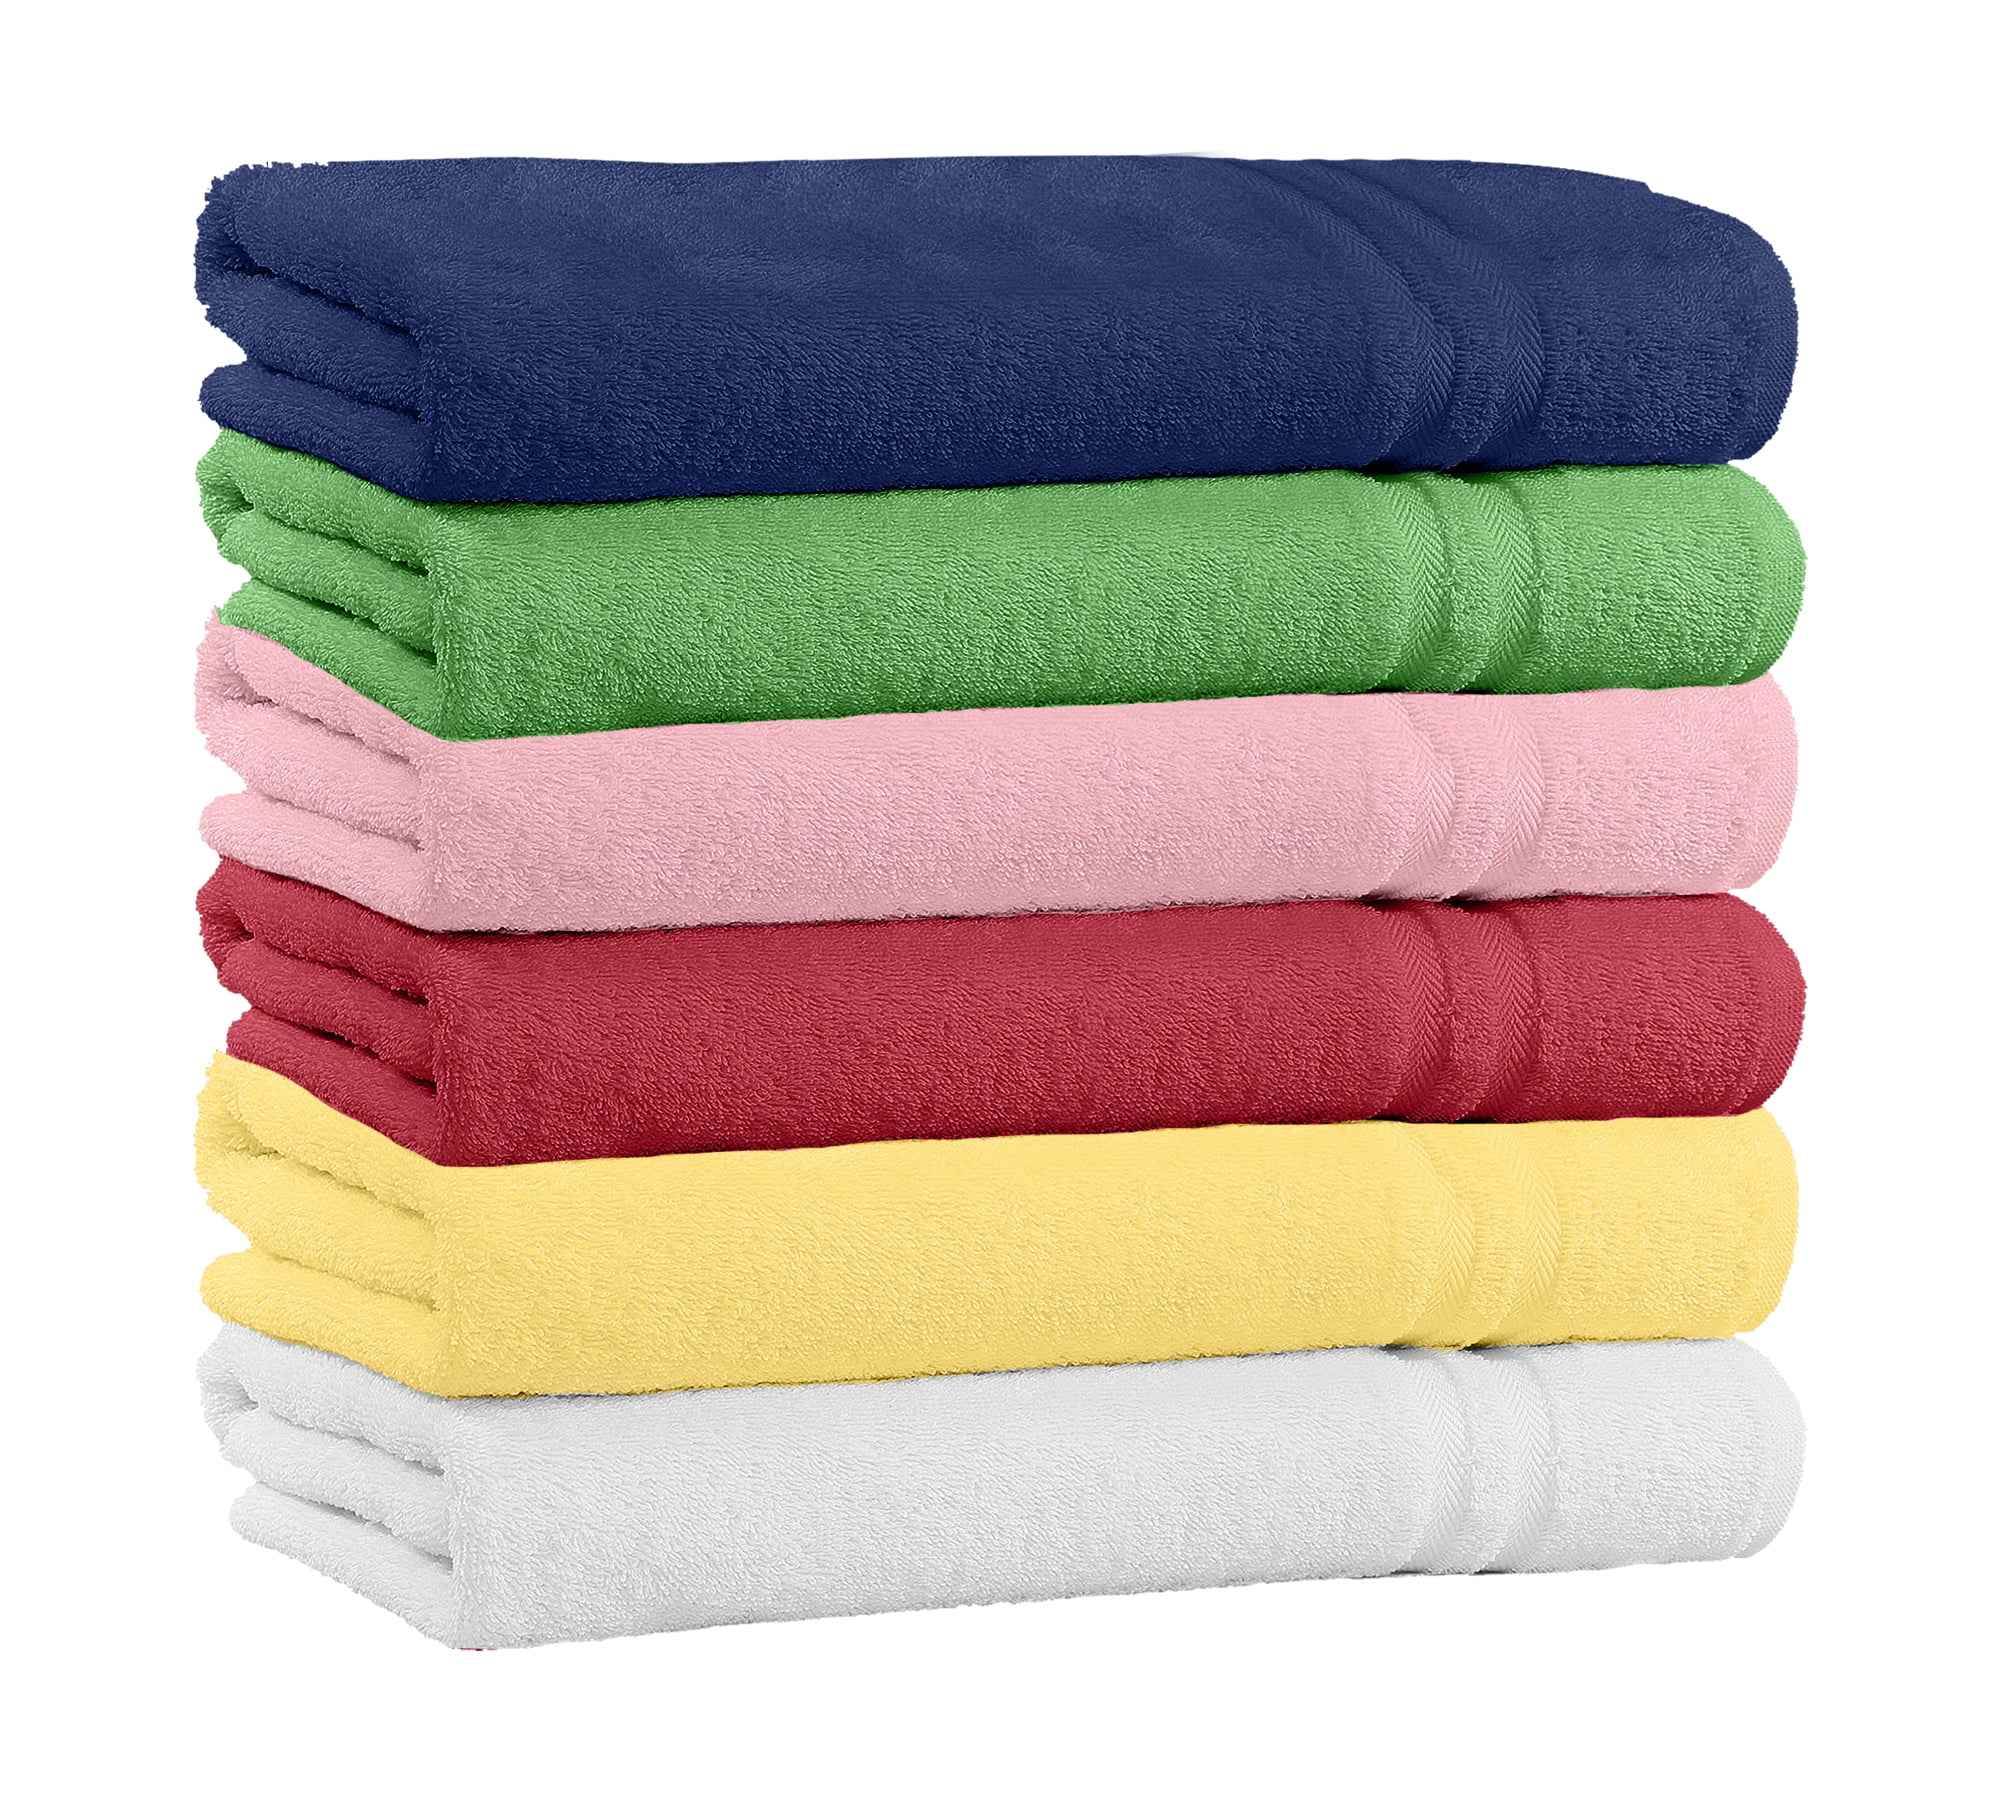 100% Cotton Extra Plush & Absorbent Bath Towels Pack of 4-56" x 28" 